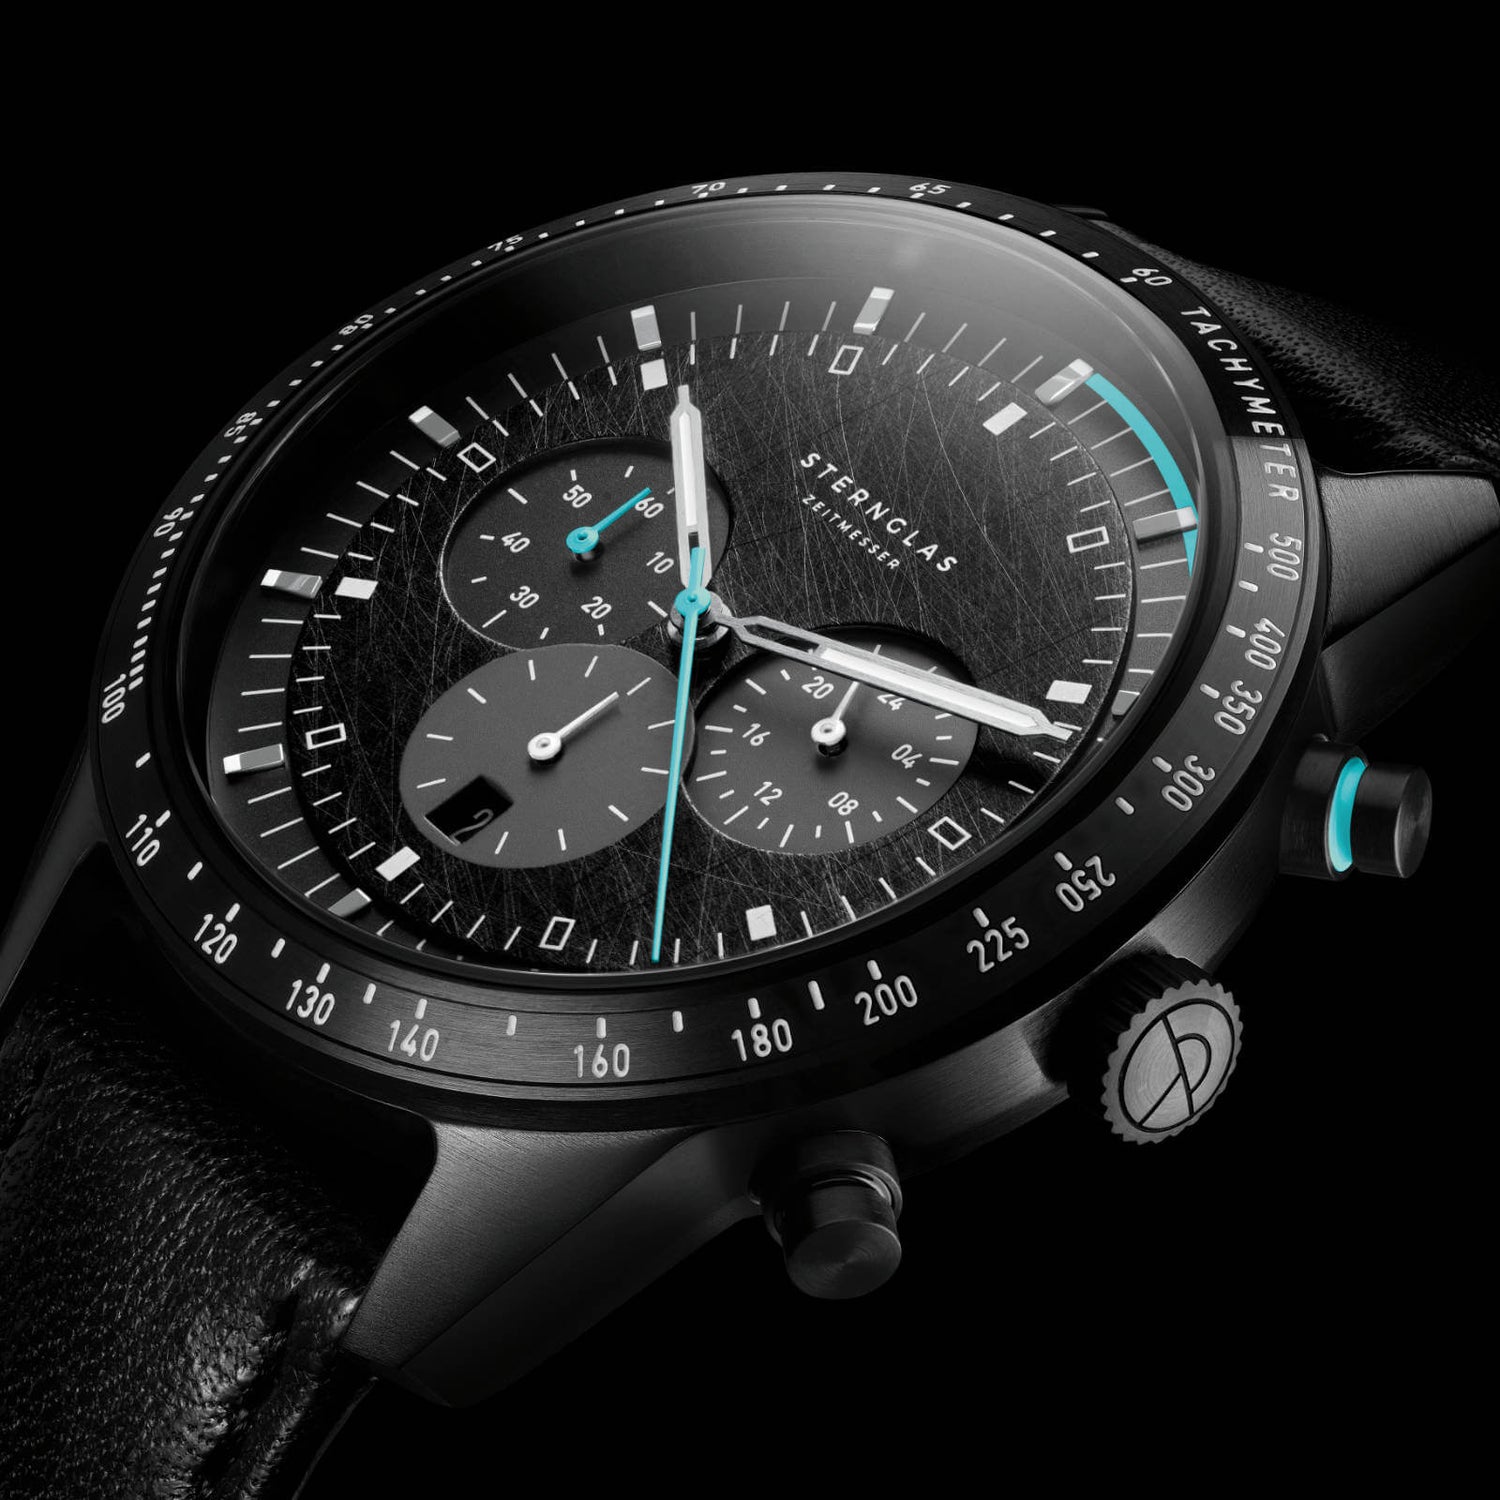 popup|Tachymeter scale|The bezel with tachymeter scale enables the calculation of speeds.